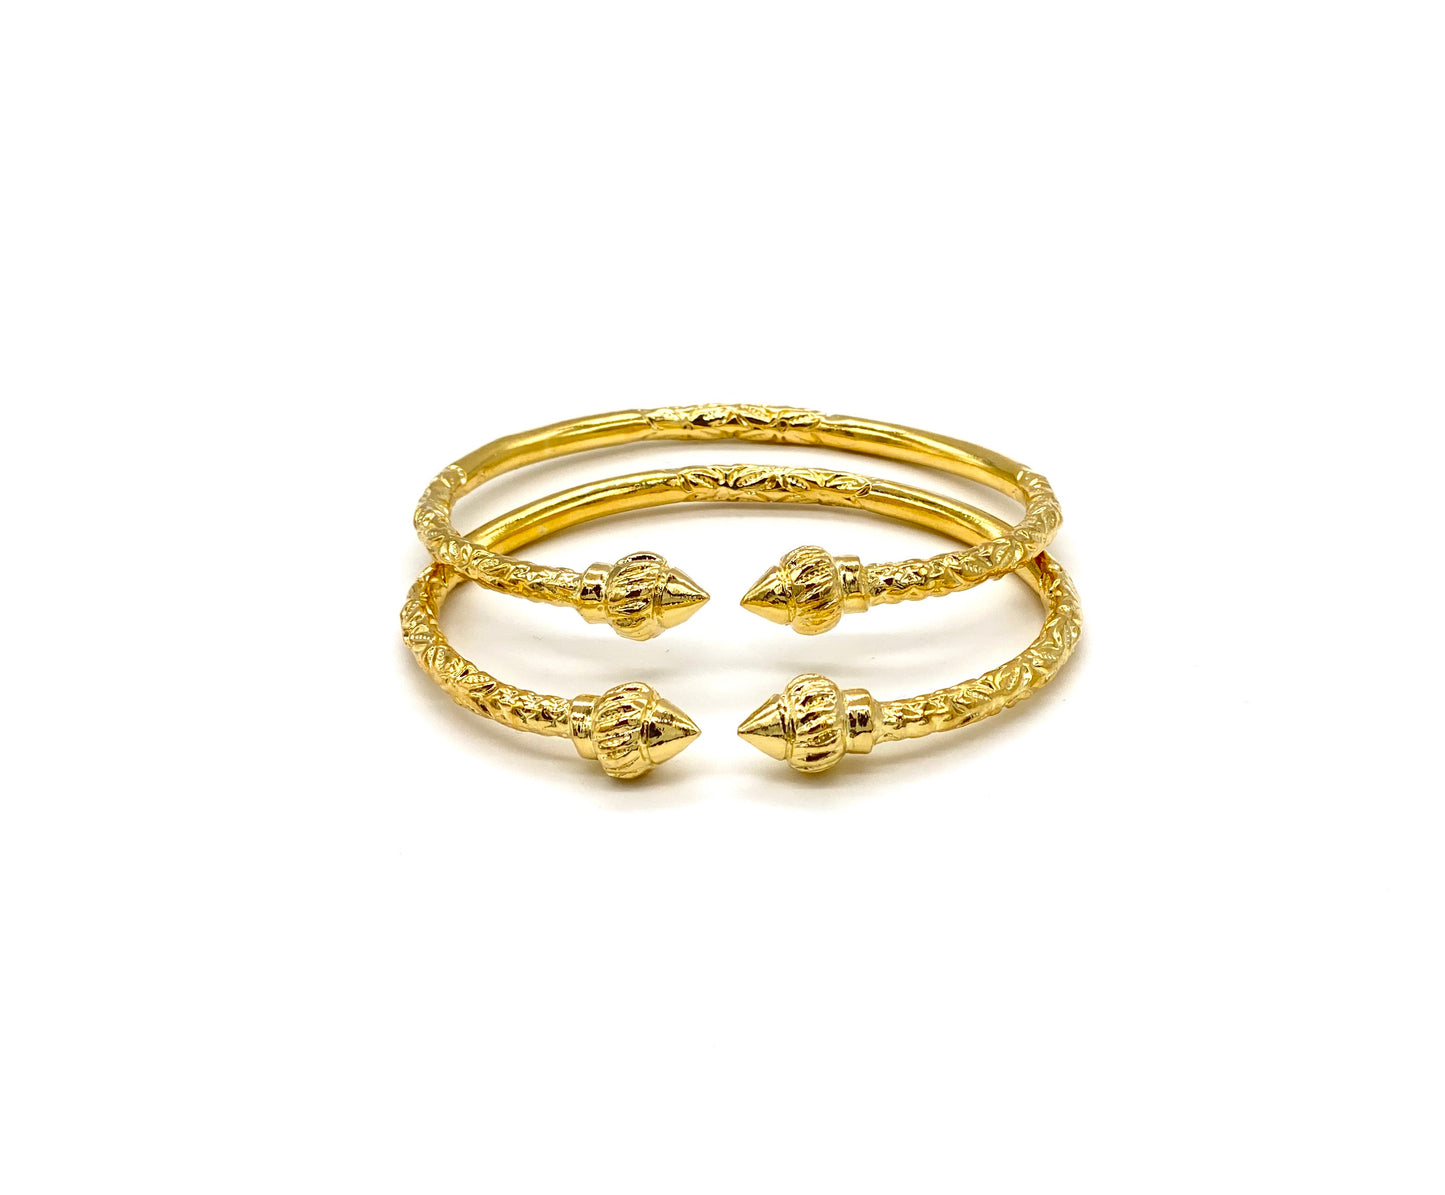 Better Jewelry Solid .925 Sterling Silver Ridged Arrow Taj Mahal Ends West Indian Bangles Plated with 14K Gold (PAIR)